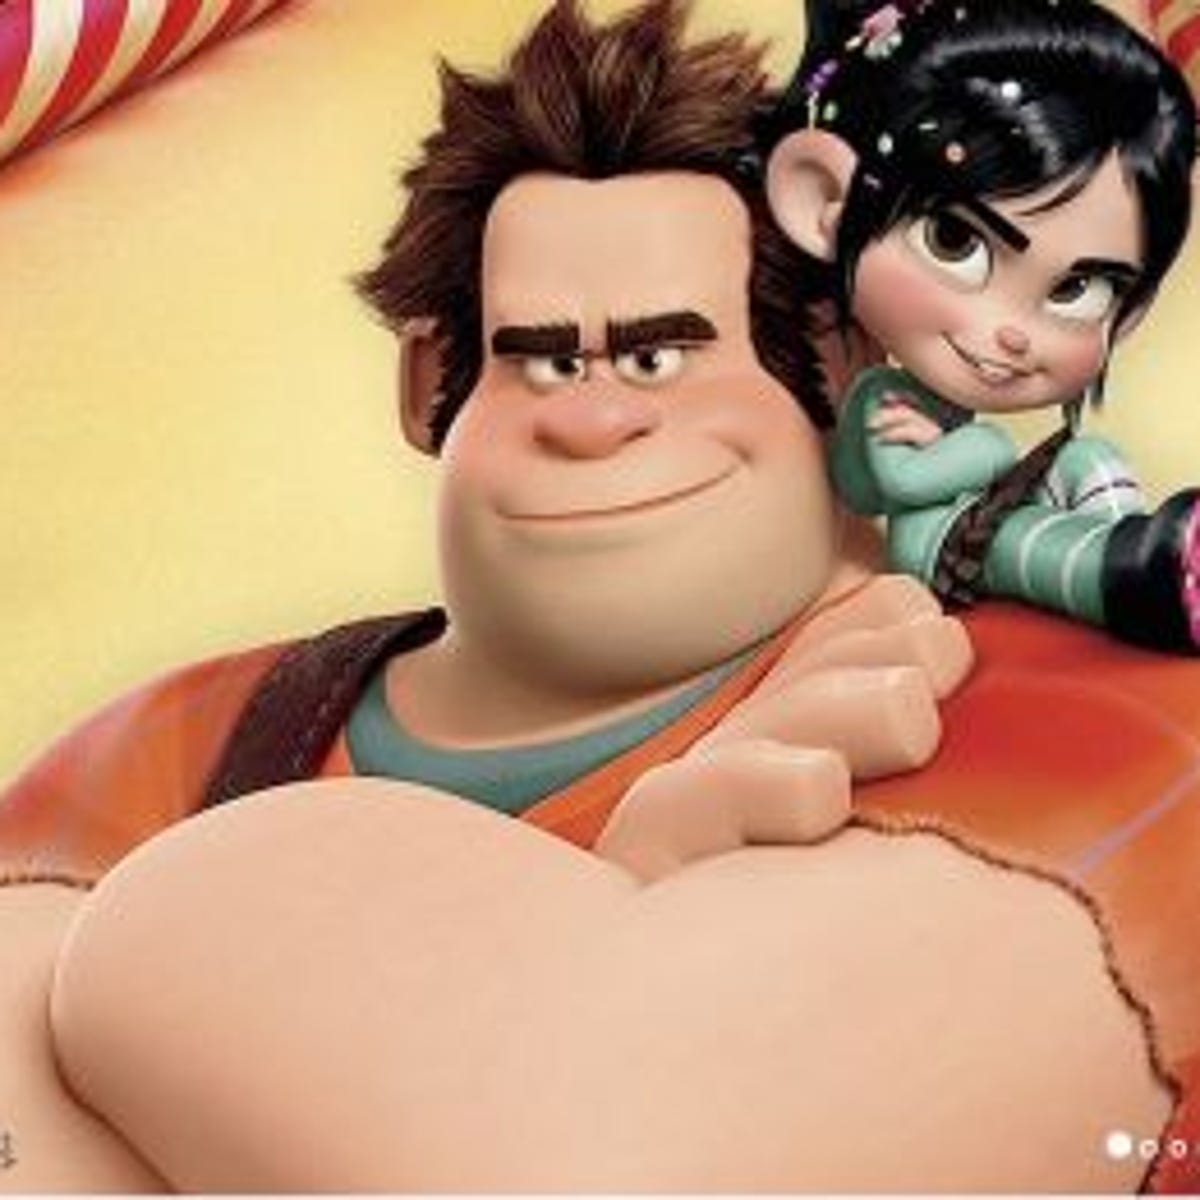 Disney Movies Anywhere comes to Android with free 'Wreck-It Ralph' - CNET